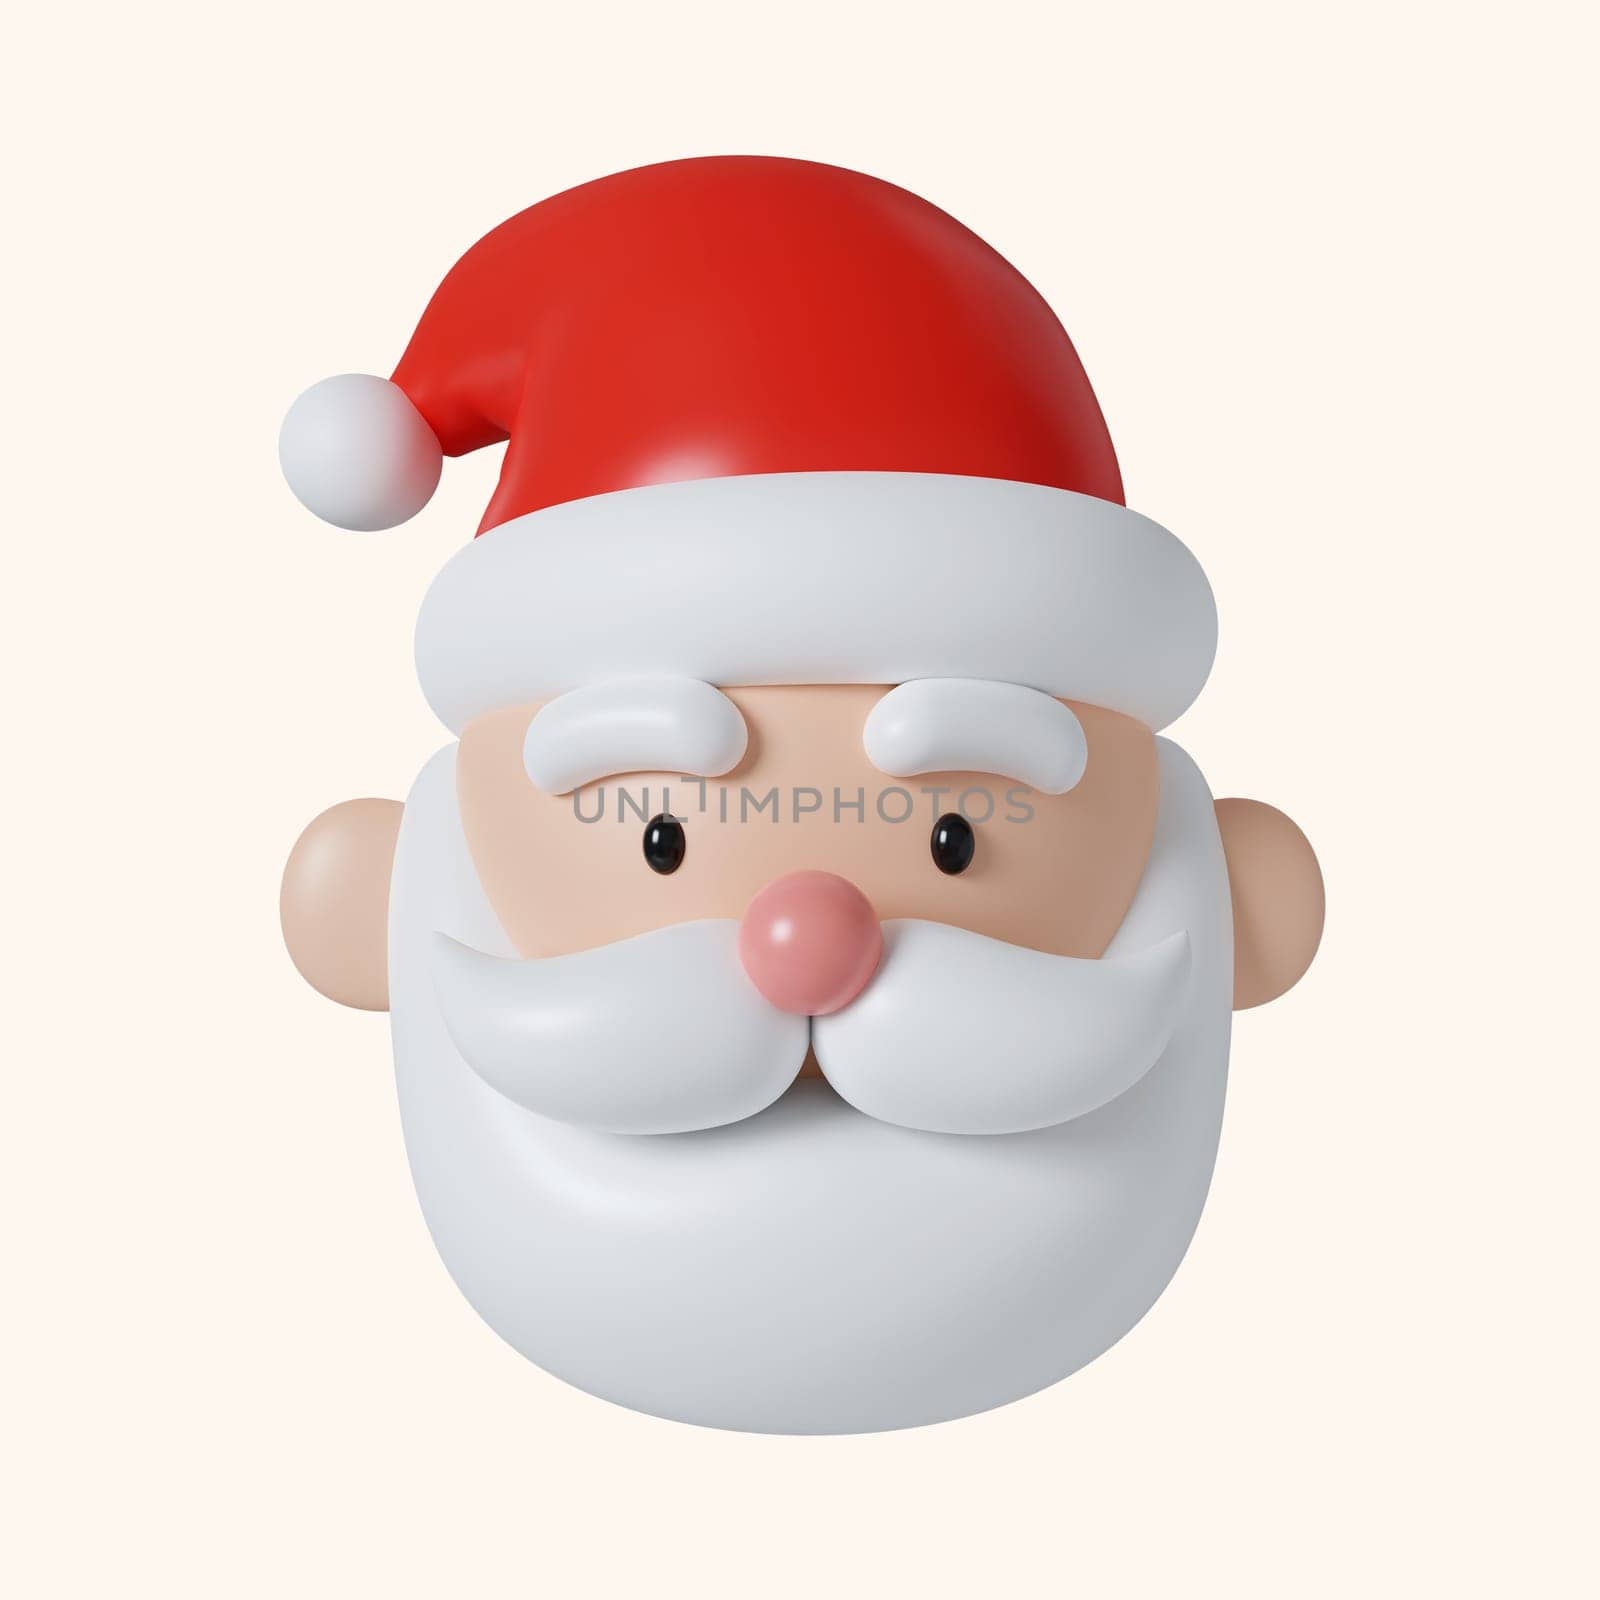 3d Christmas santa icon. minimal decorative festive conical shape tree. New Year's holiday decor. 3d design element In cartoon style. Icon isolated on white background. 3D illustration by meepiangraphic